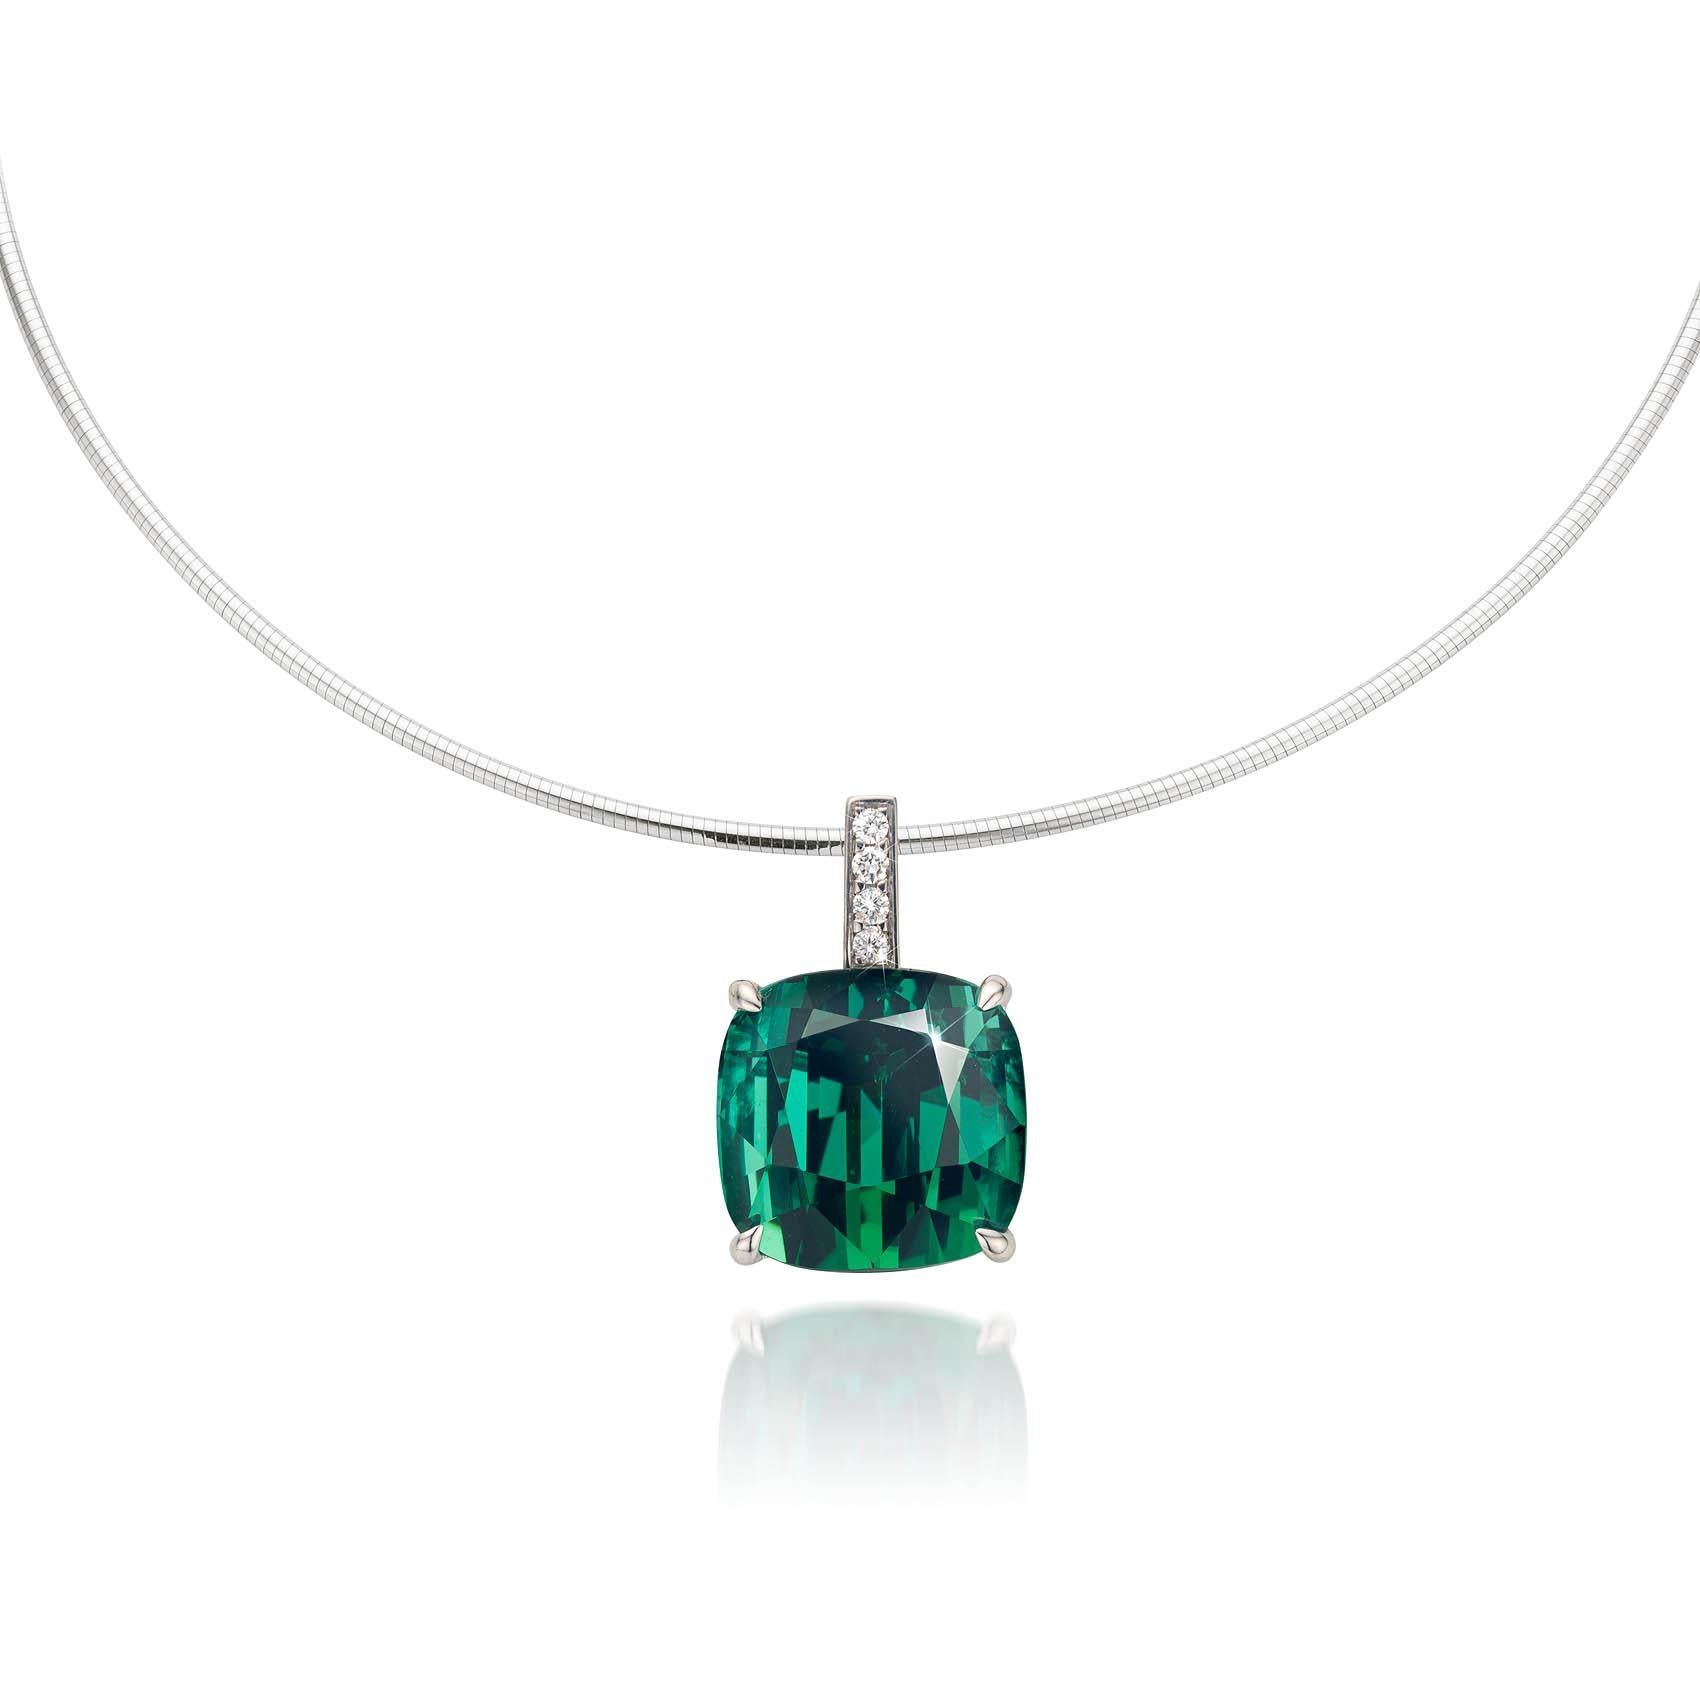 This is a 14 Carat white gold pendant with a 9,40 ct. vivid clean green Tourmaline. Above the Tourmaline are 4 x 0,01 ct. Brilliant-cut Diamonds. A very dedicated item for special occasions. Please note, that the necklace is not included.
Cober